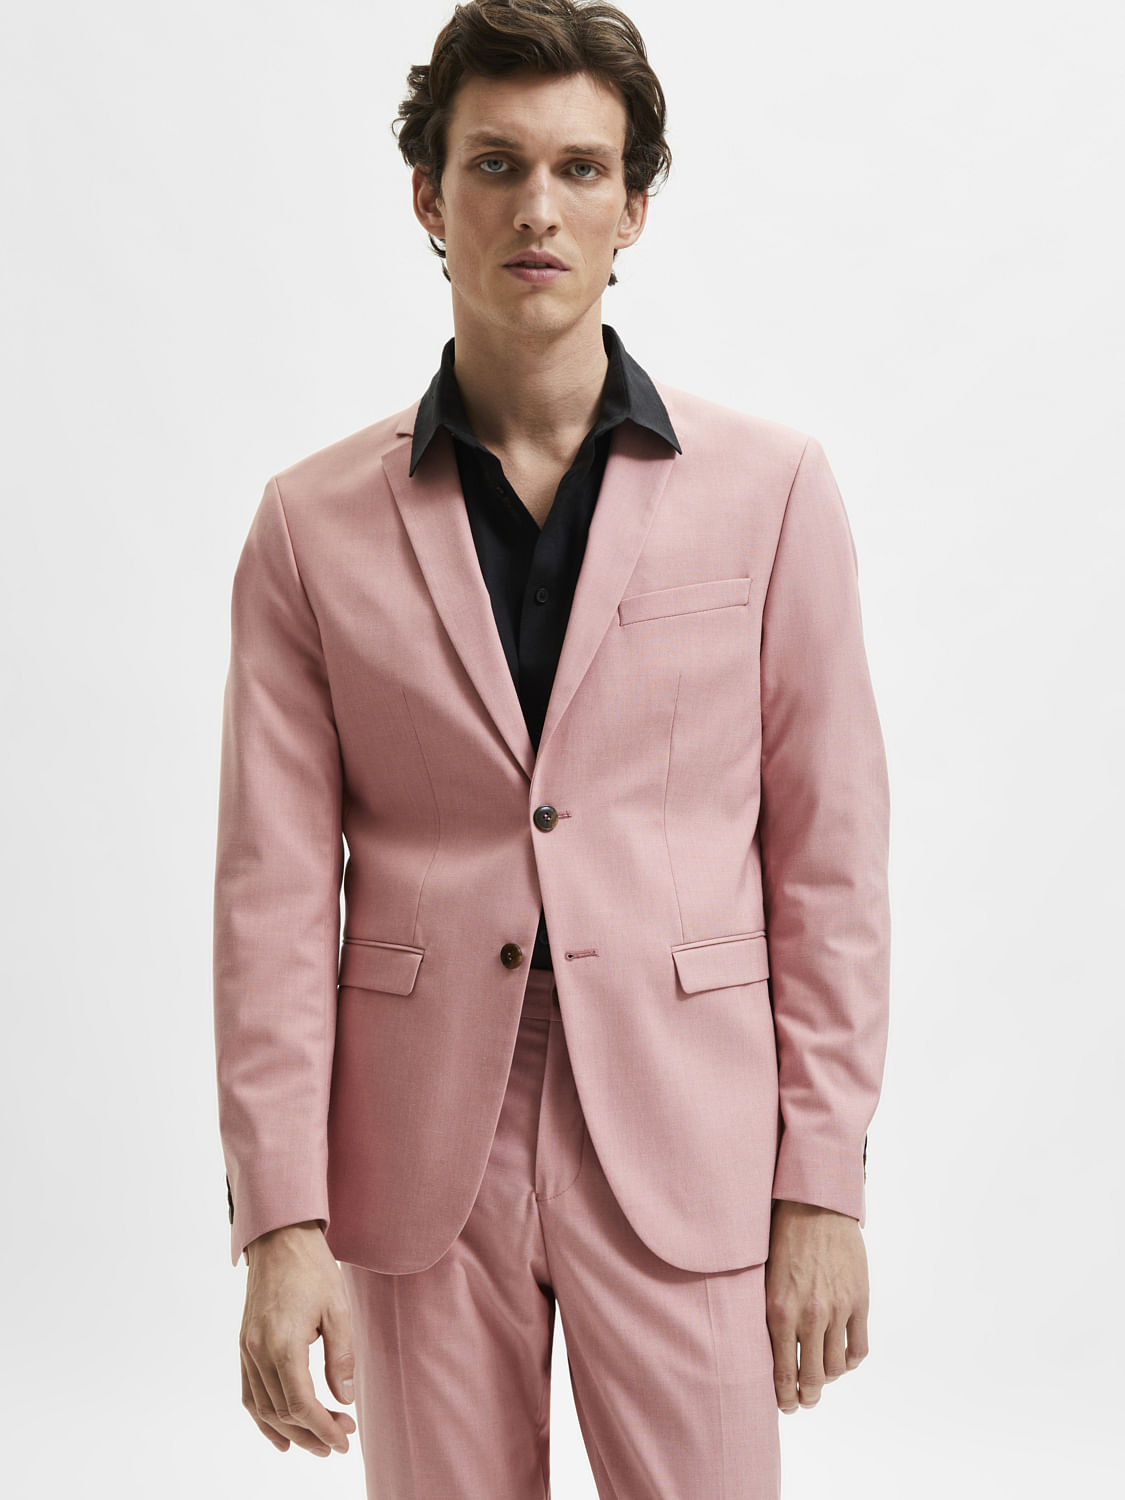 Wintage Men's Polyester Cotton and Evening 2 Pc Suit : Pink